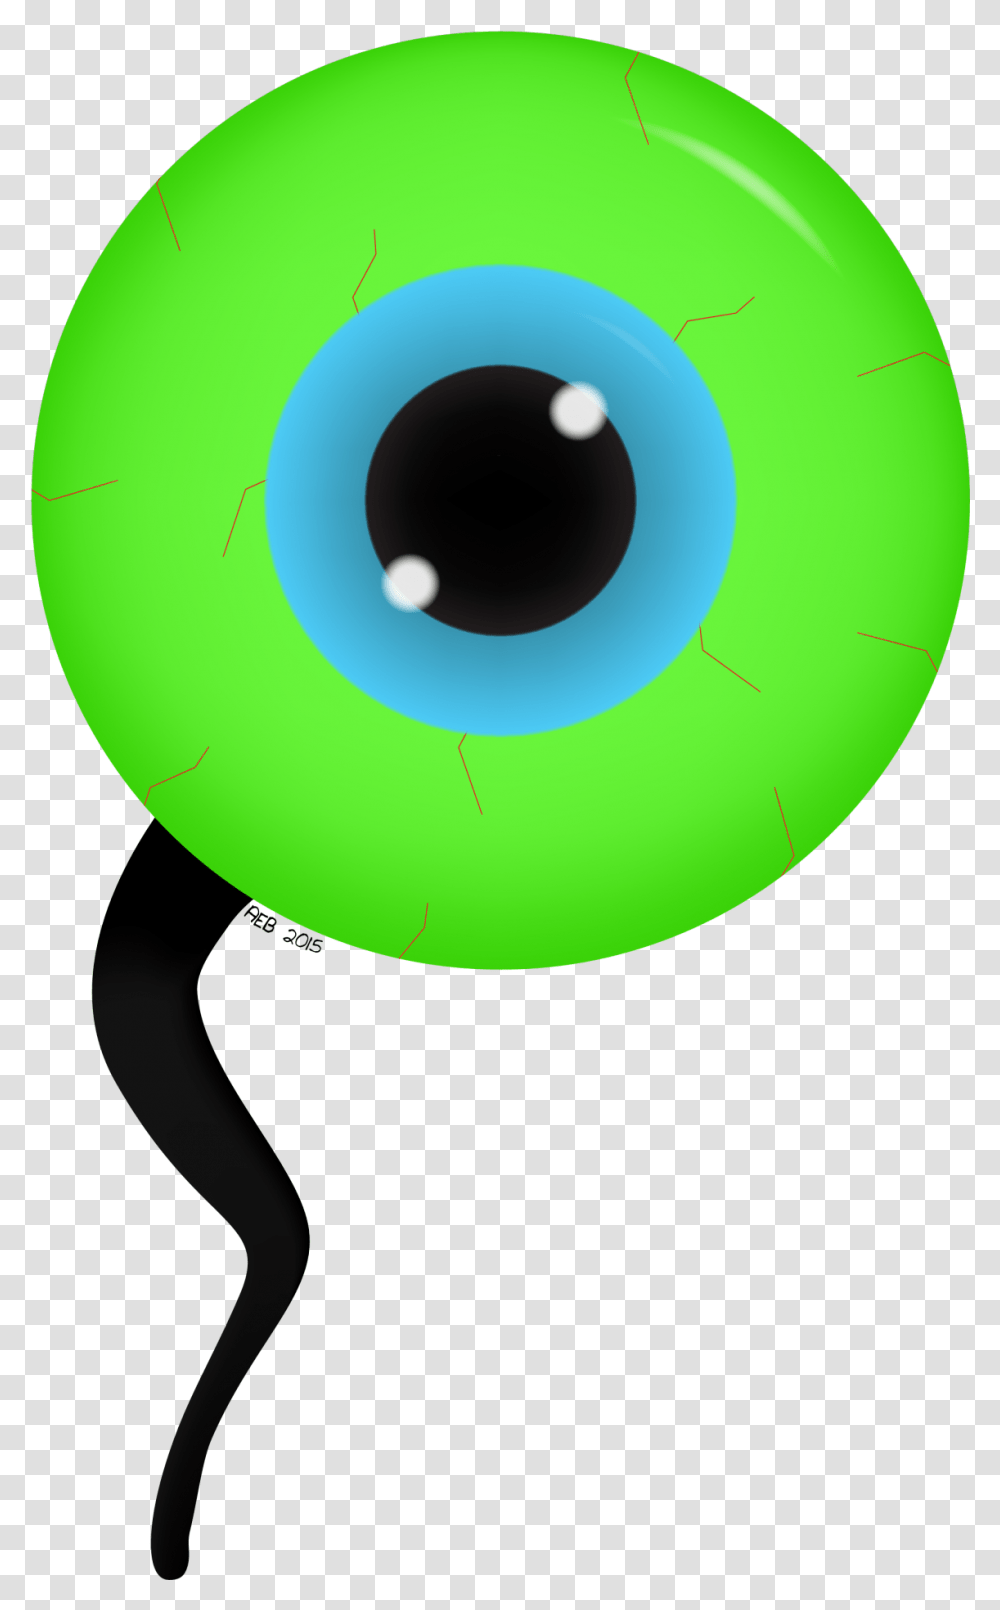 Sam The Septic Eye The Mascot Of Youtube Lets Player Sam Septiceye, Balloon, Sphere, Electronics, Hole Transparent Png